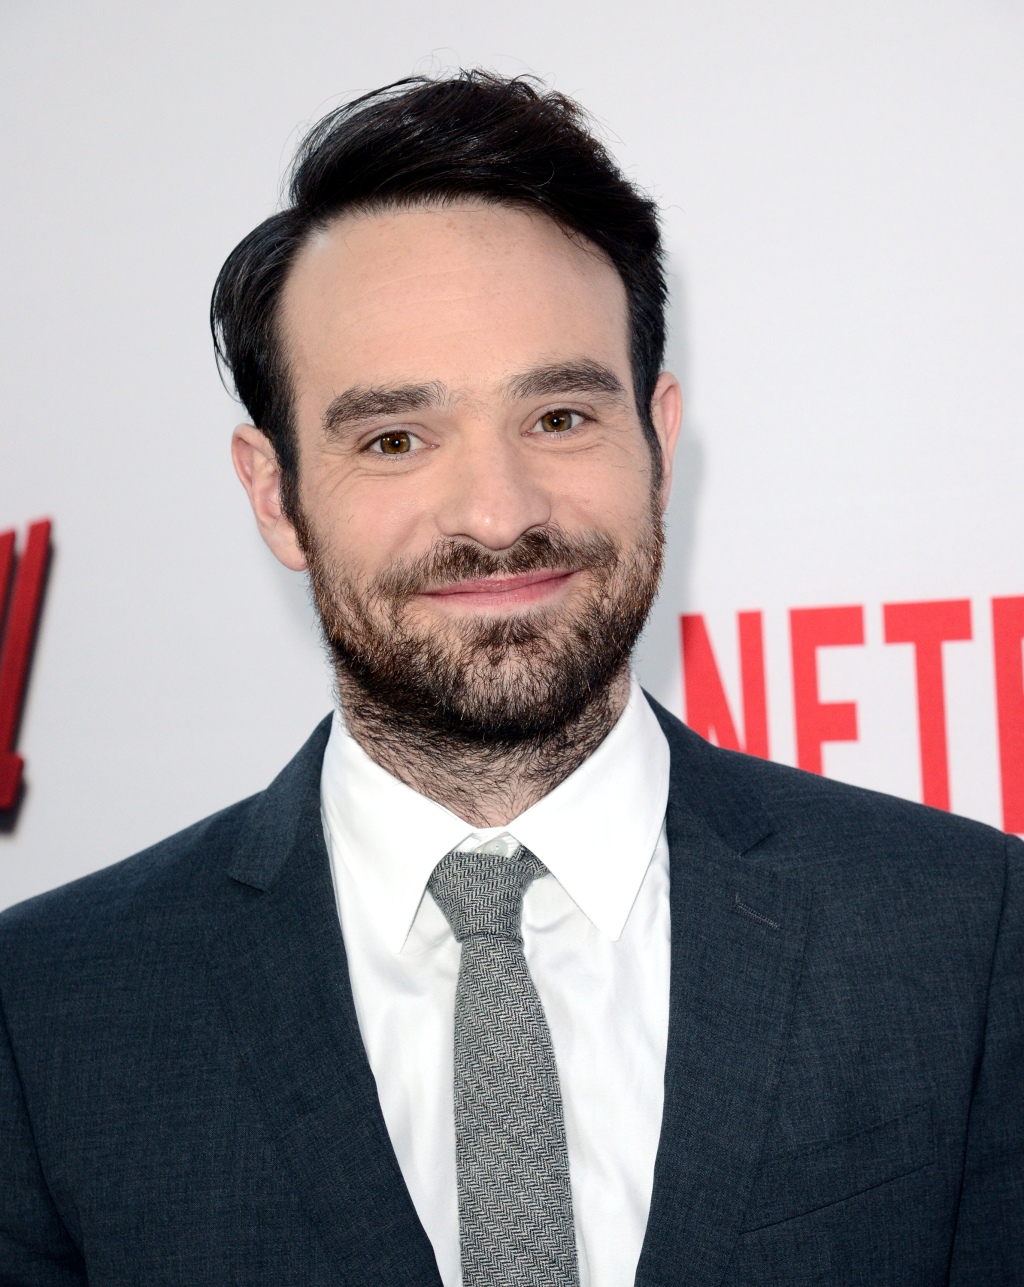 ‘Daredevil’ Star Charlie Cox Signs With Range Media Partners